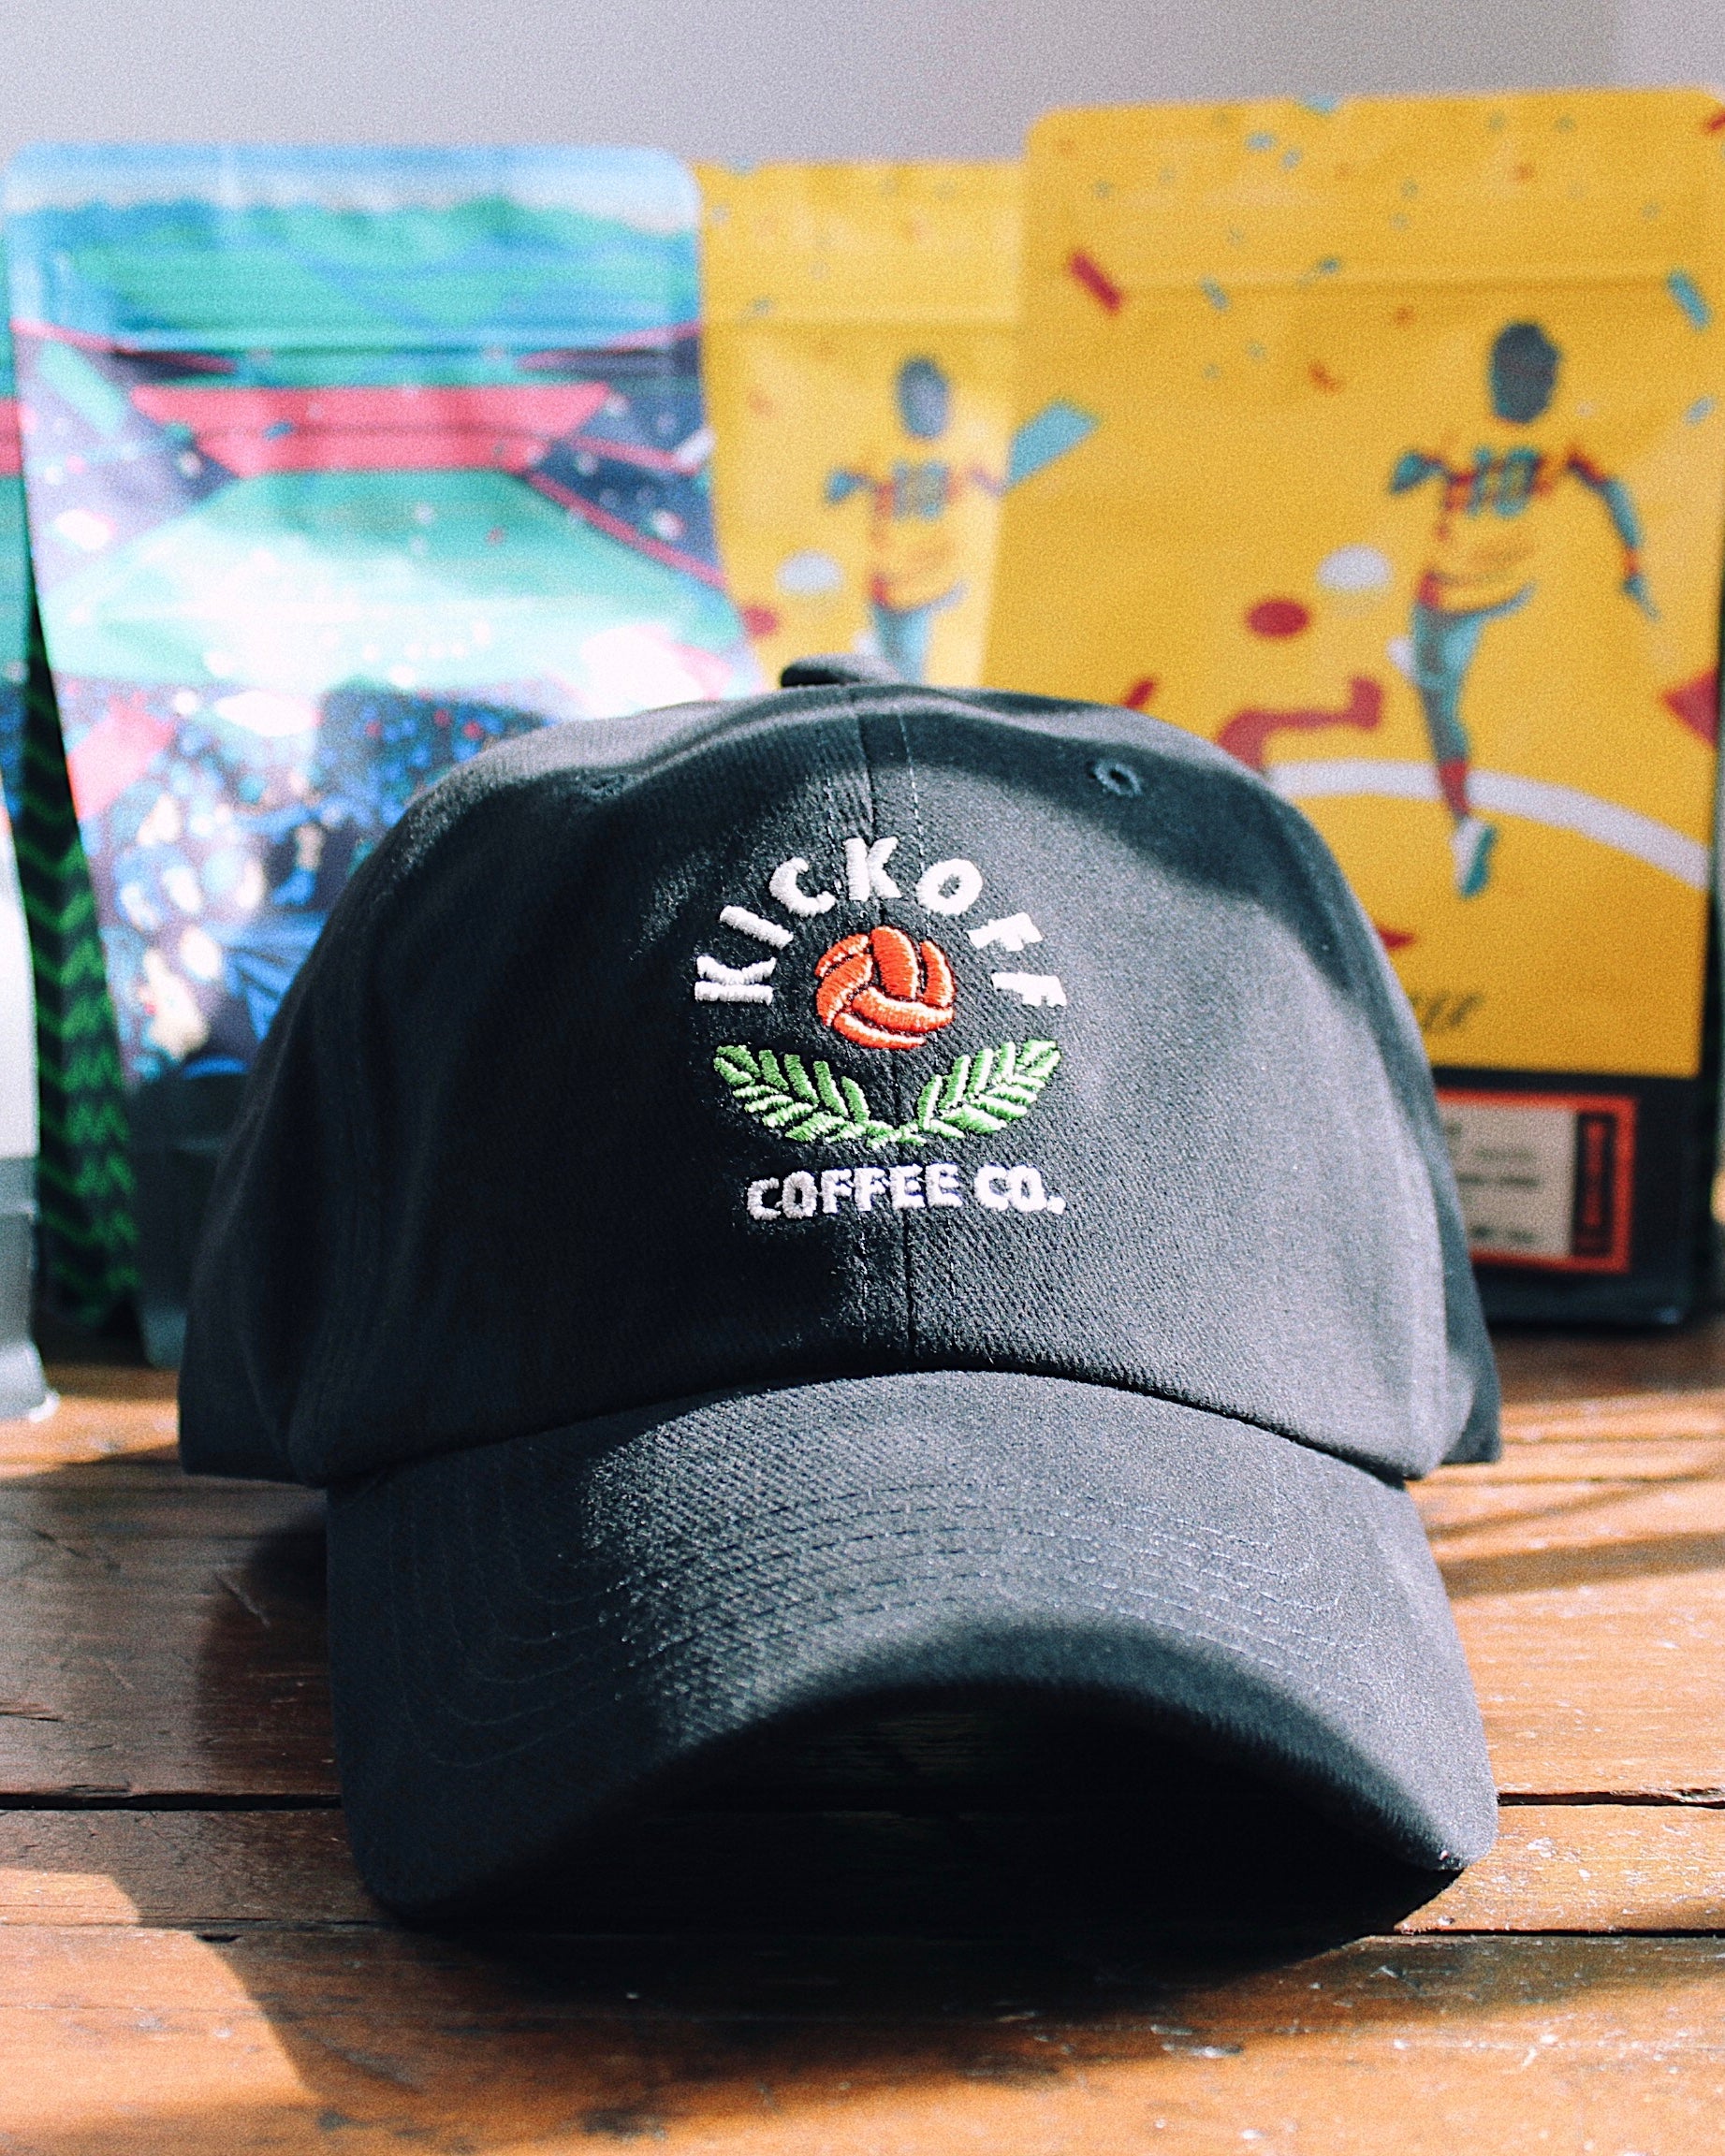 black cap with embroidered kickoff logo on the front